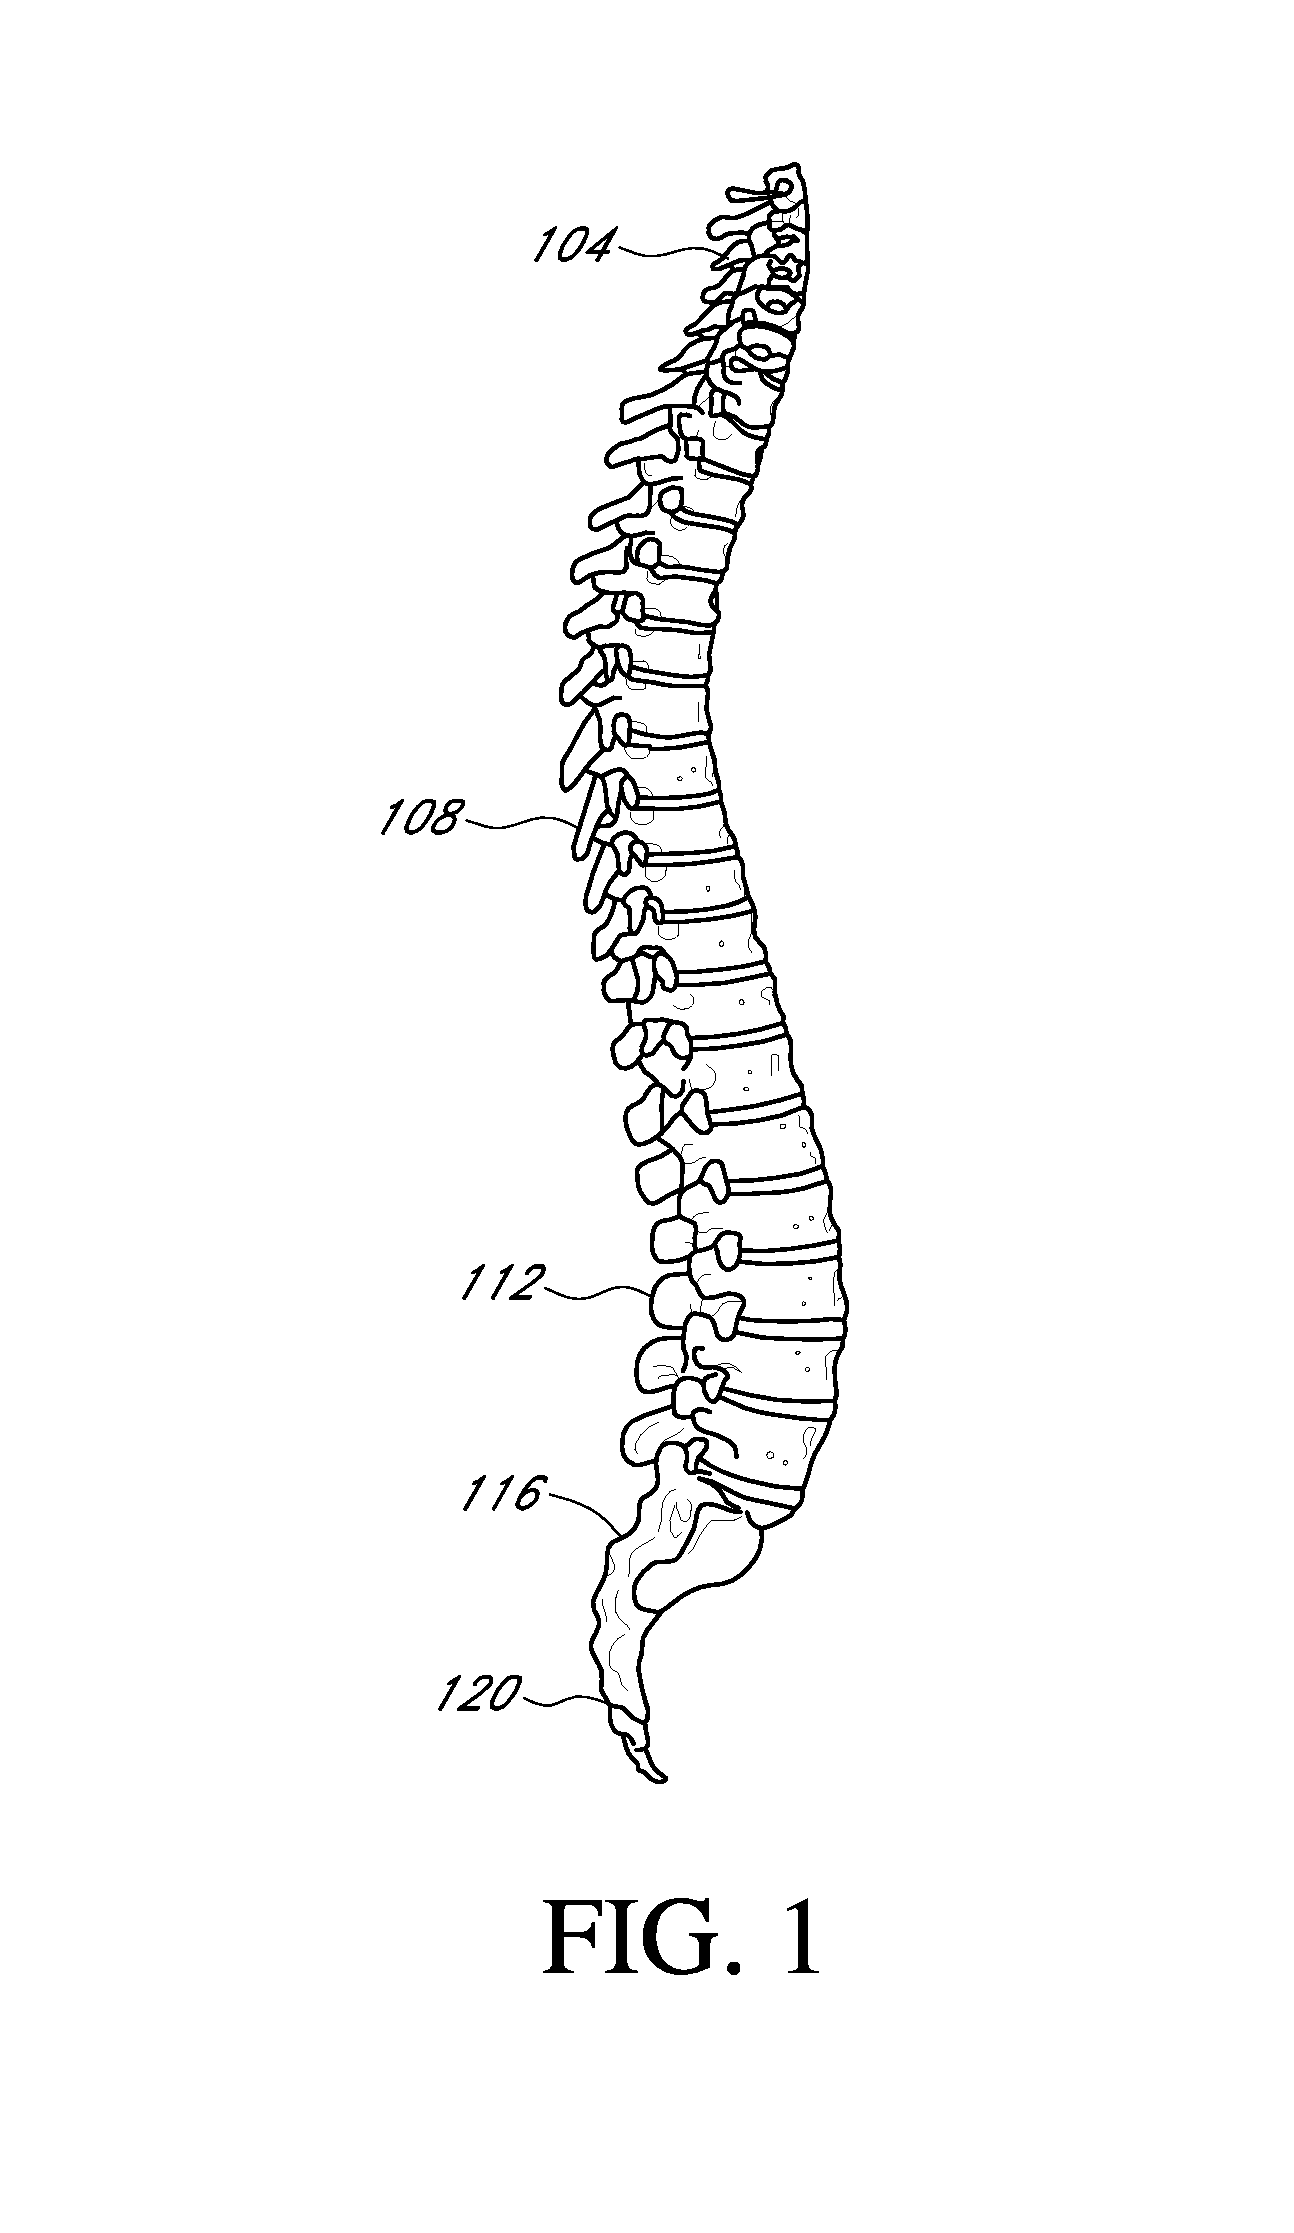 Spinal implants and implantation system